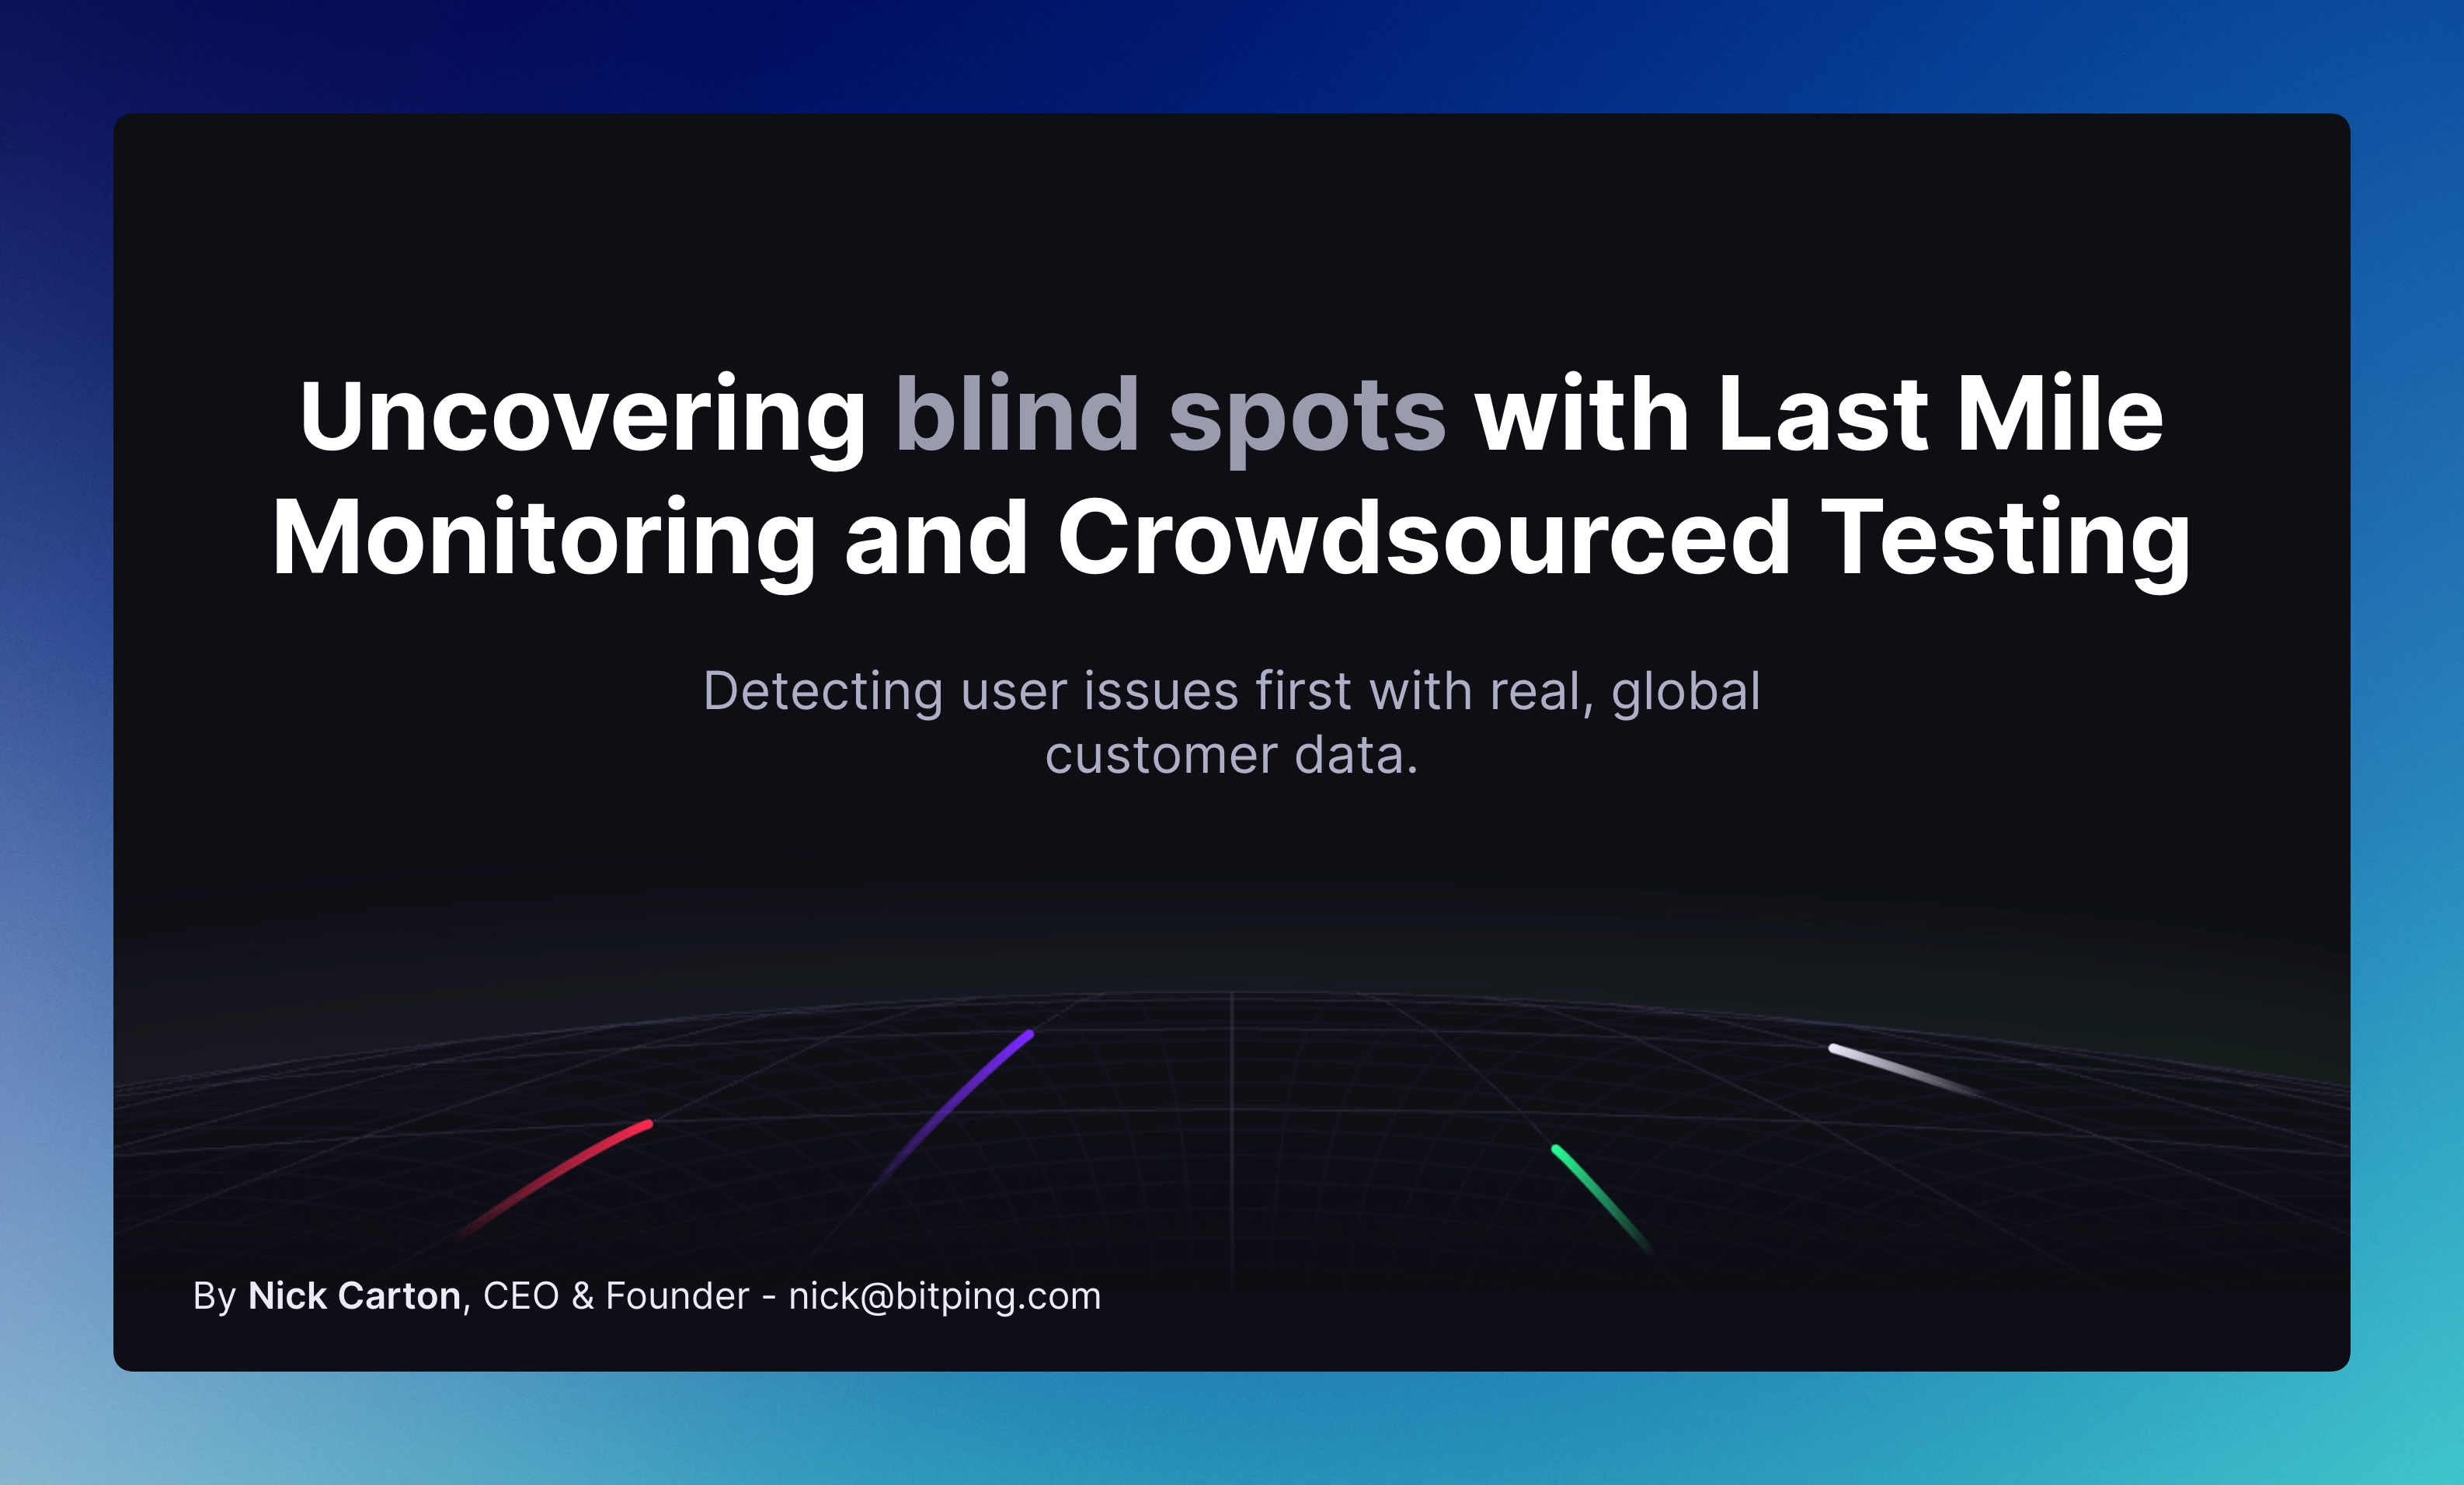 Image for Uncovering blind spots with Last Mile Monitoring and Crowdsourced Testing